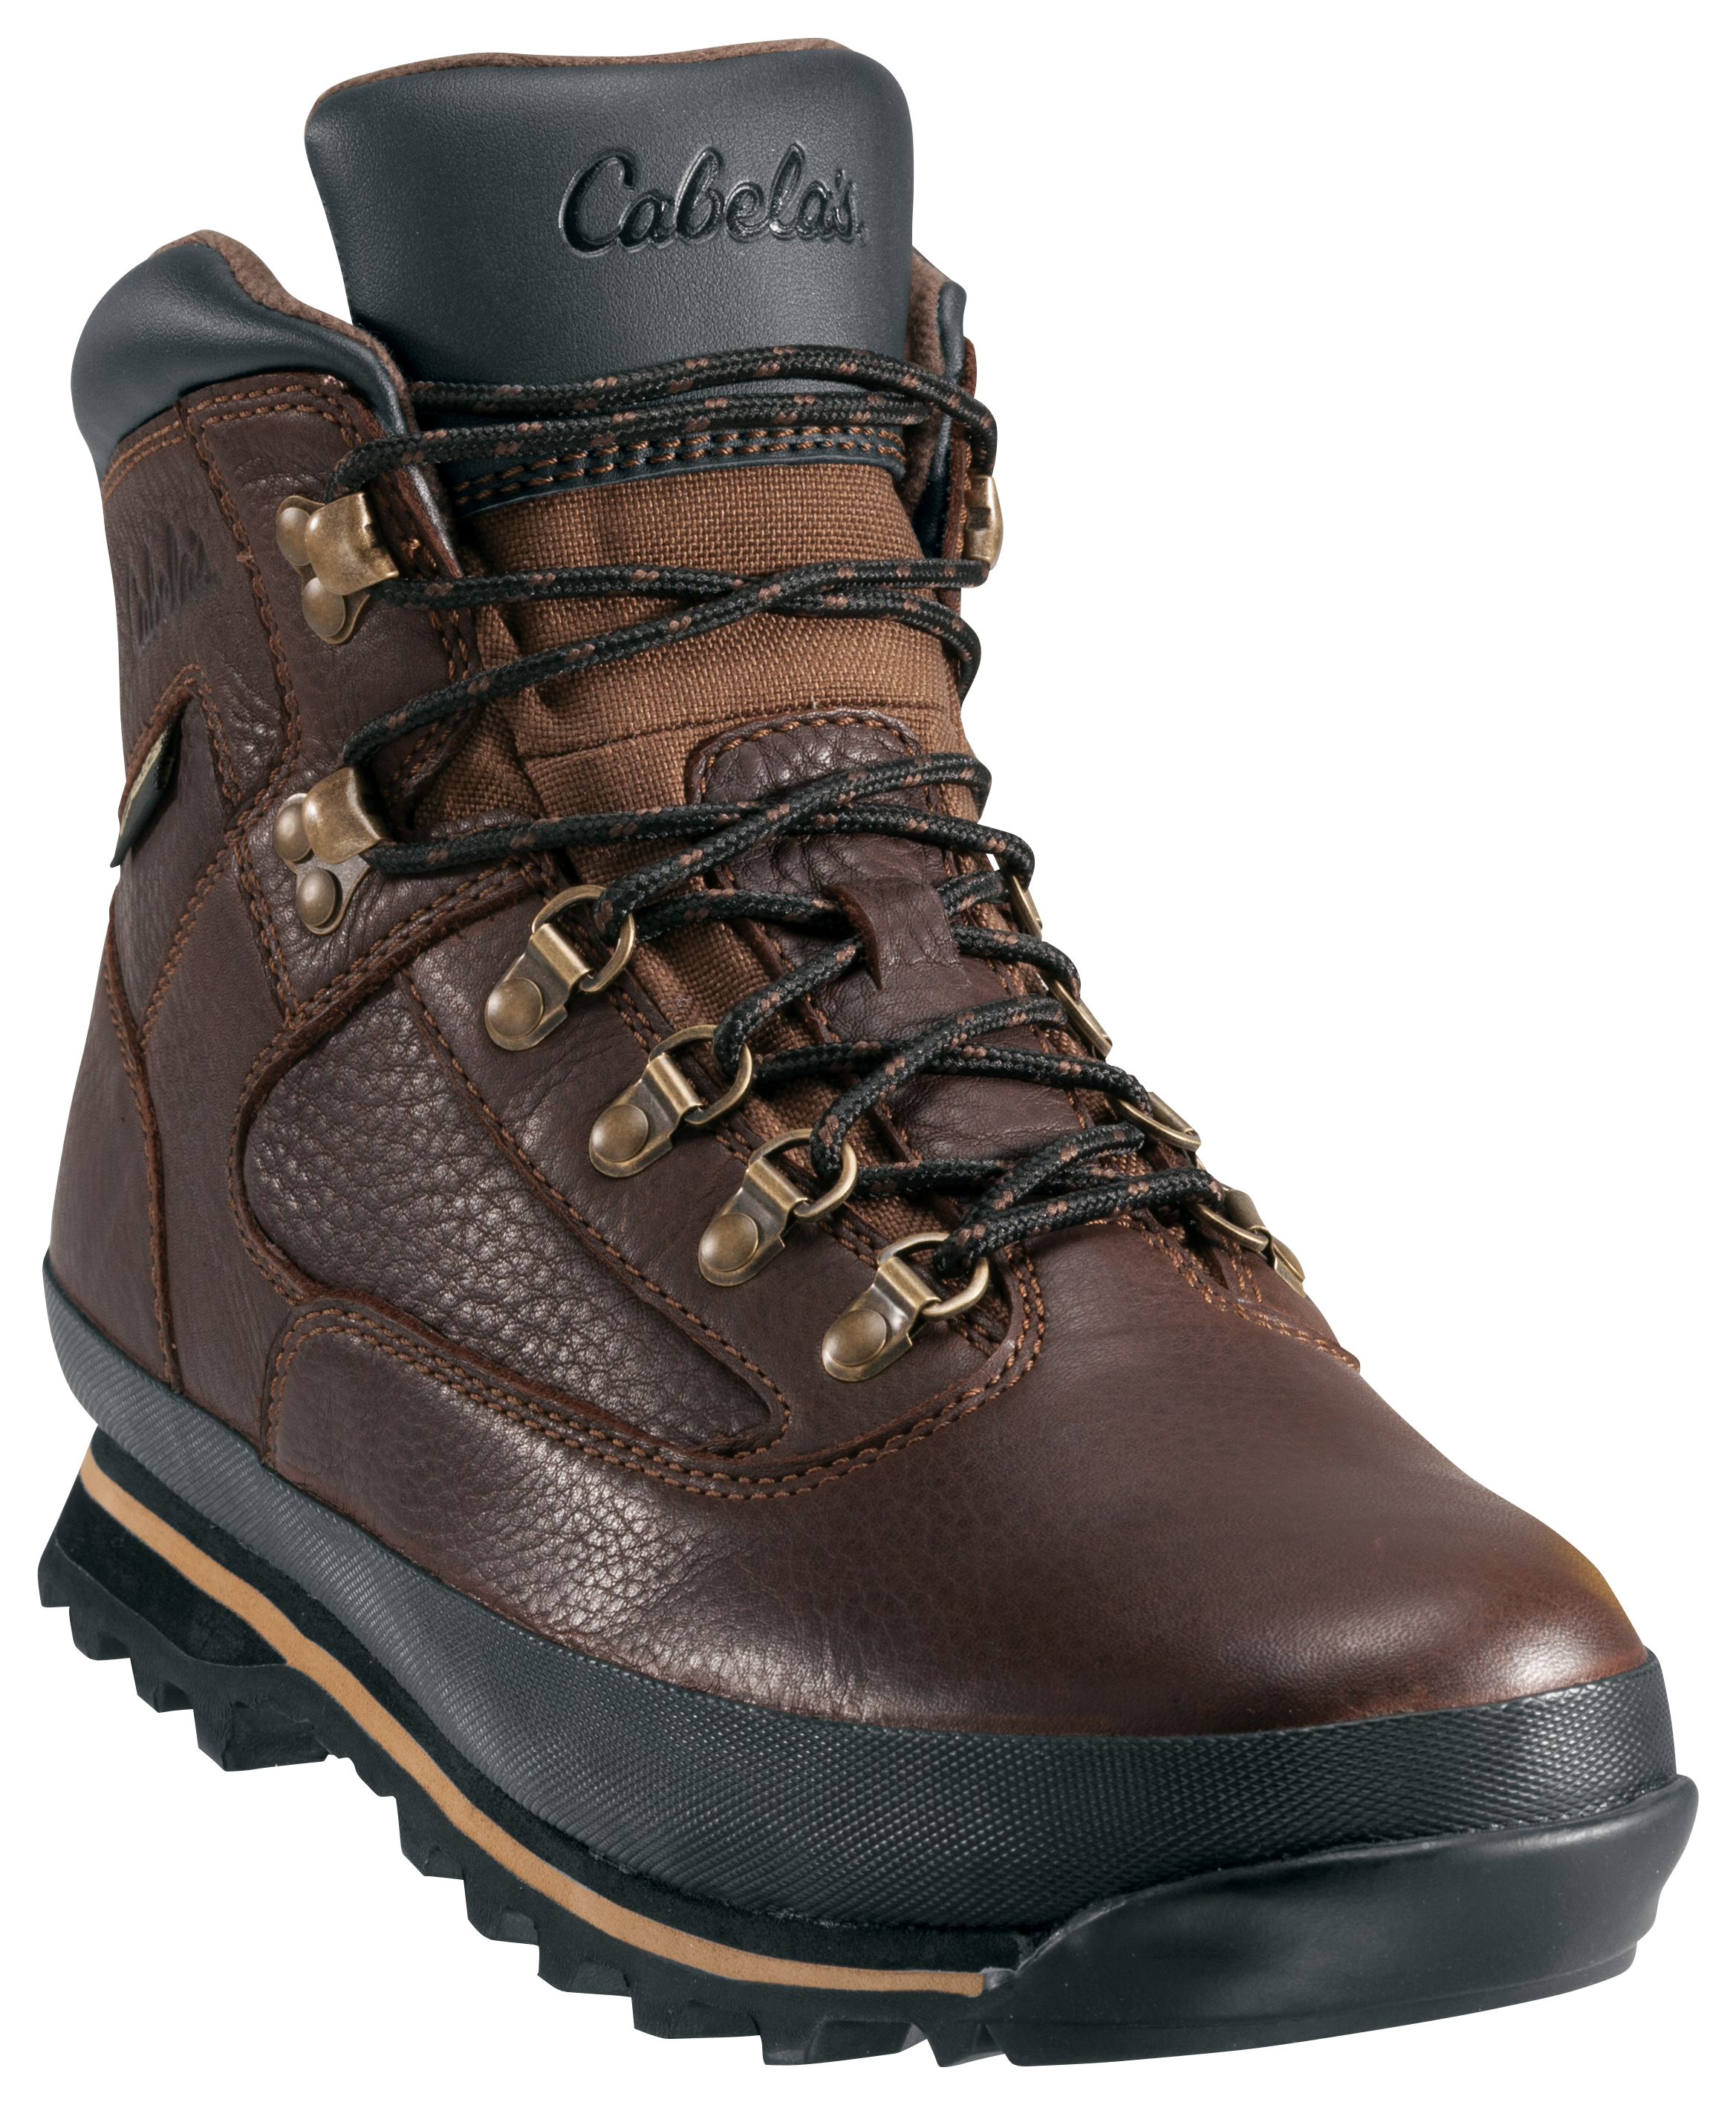 Cabela's Rimrock Mid GORE-TEX Hiking Boots for Men - Brown - 13W